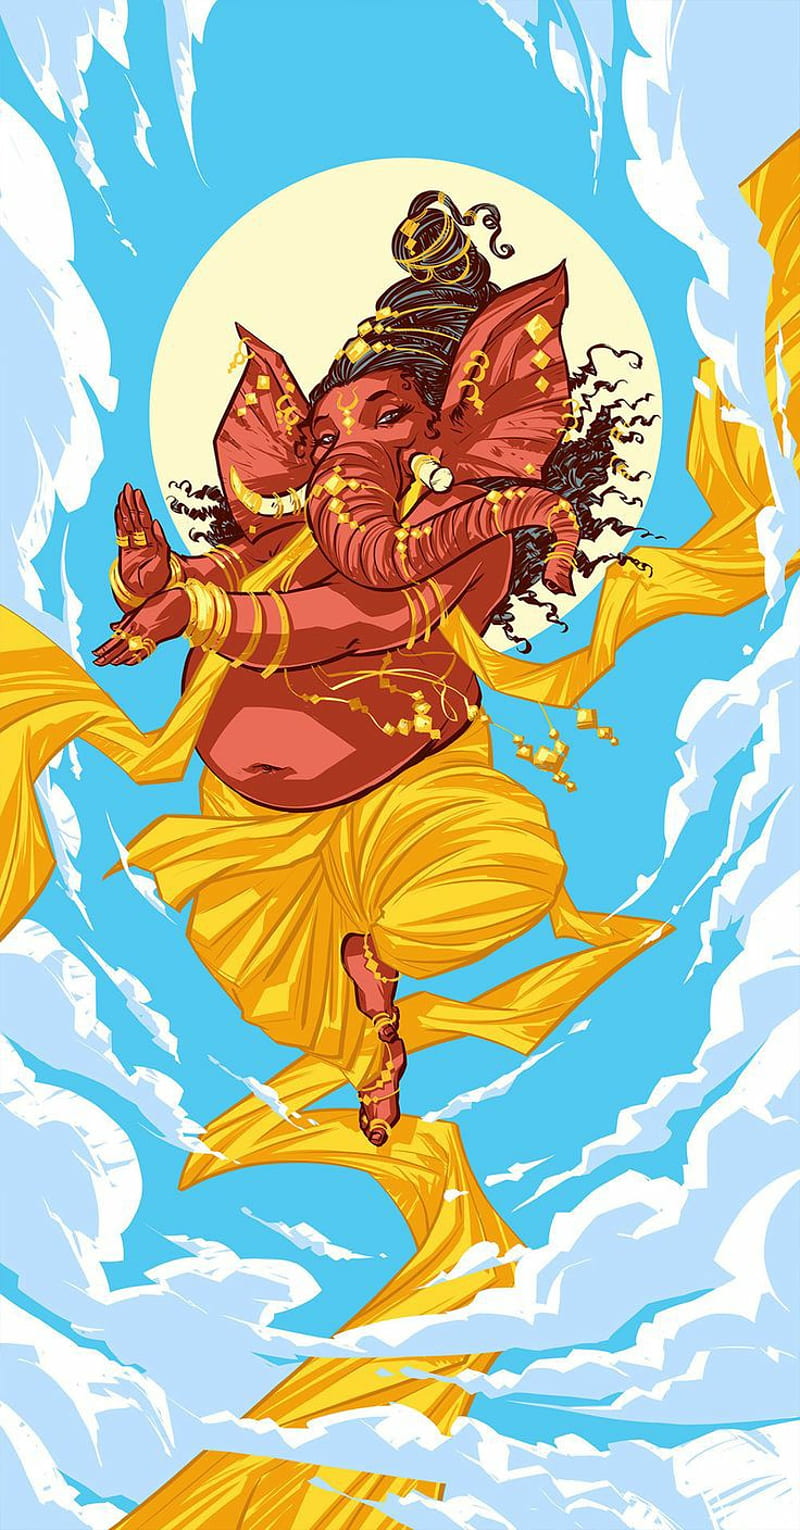 Hindu Lord Ganesha Coloring Page Outline Sketch Drawing Vector, Wing Drawing,  Ring Drawing, Color Drawing PNG and Vector with Transparent Background for  Free Download